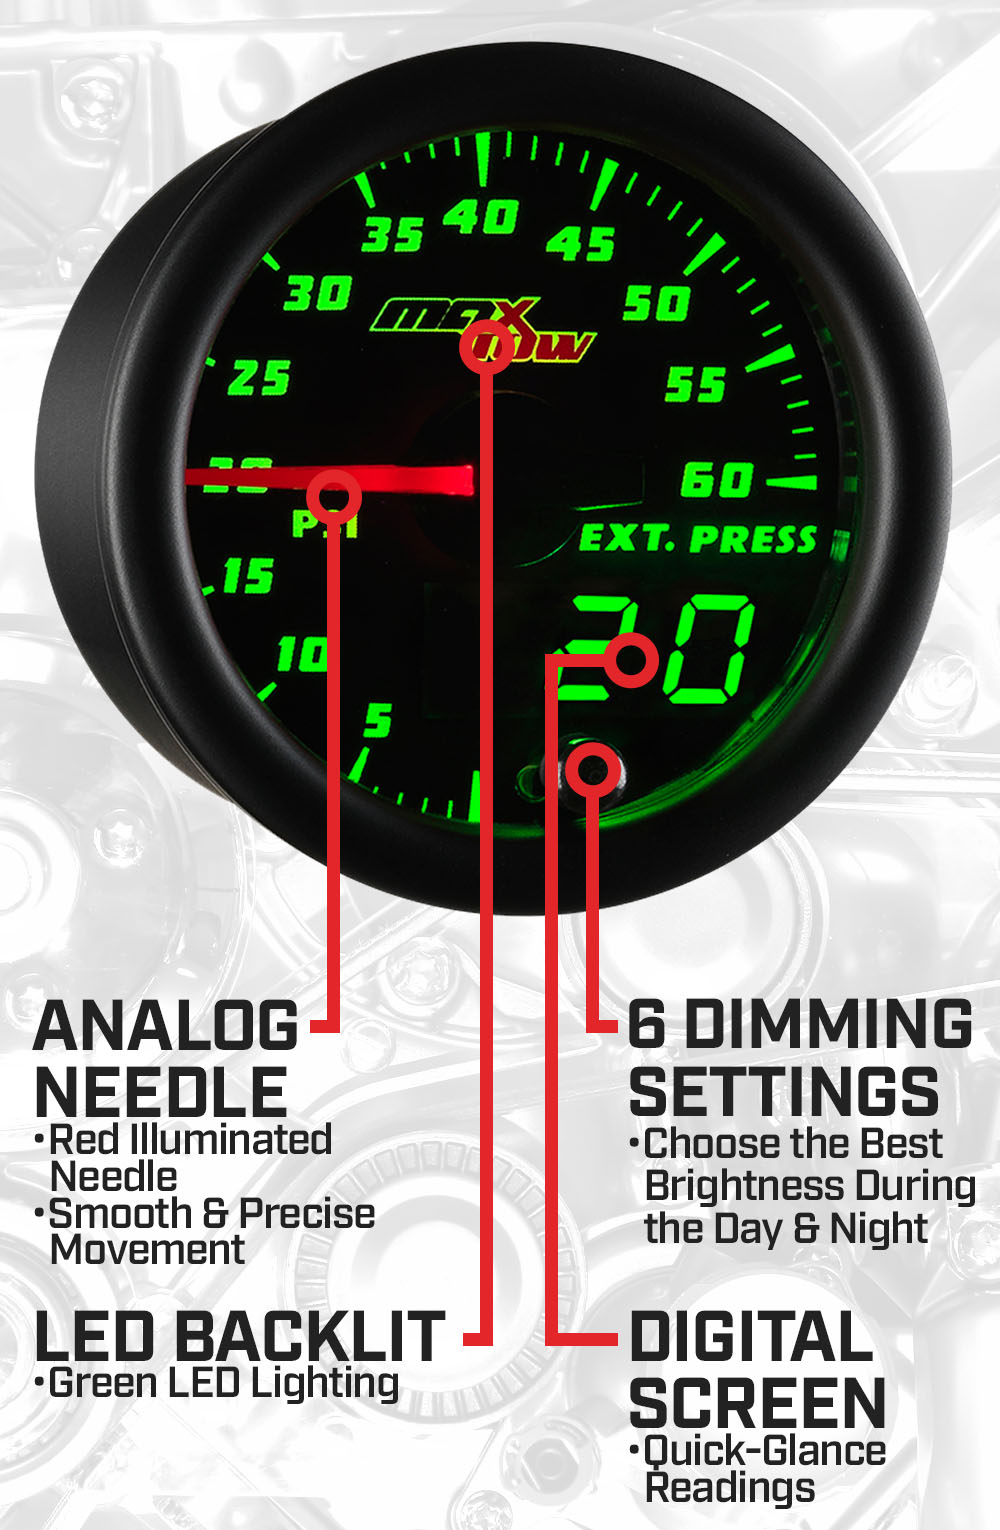 Black & Green Double Vision 60 PSI Drive Pressure Gauge Features